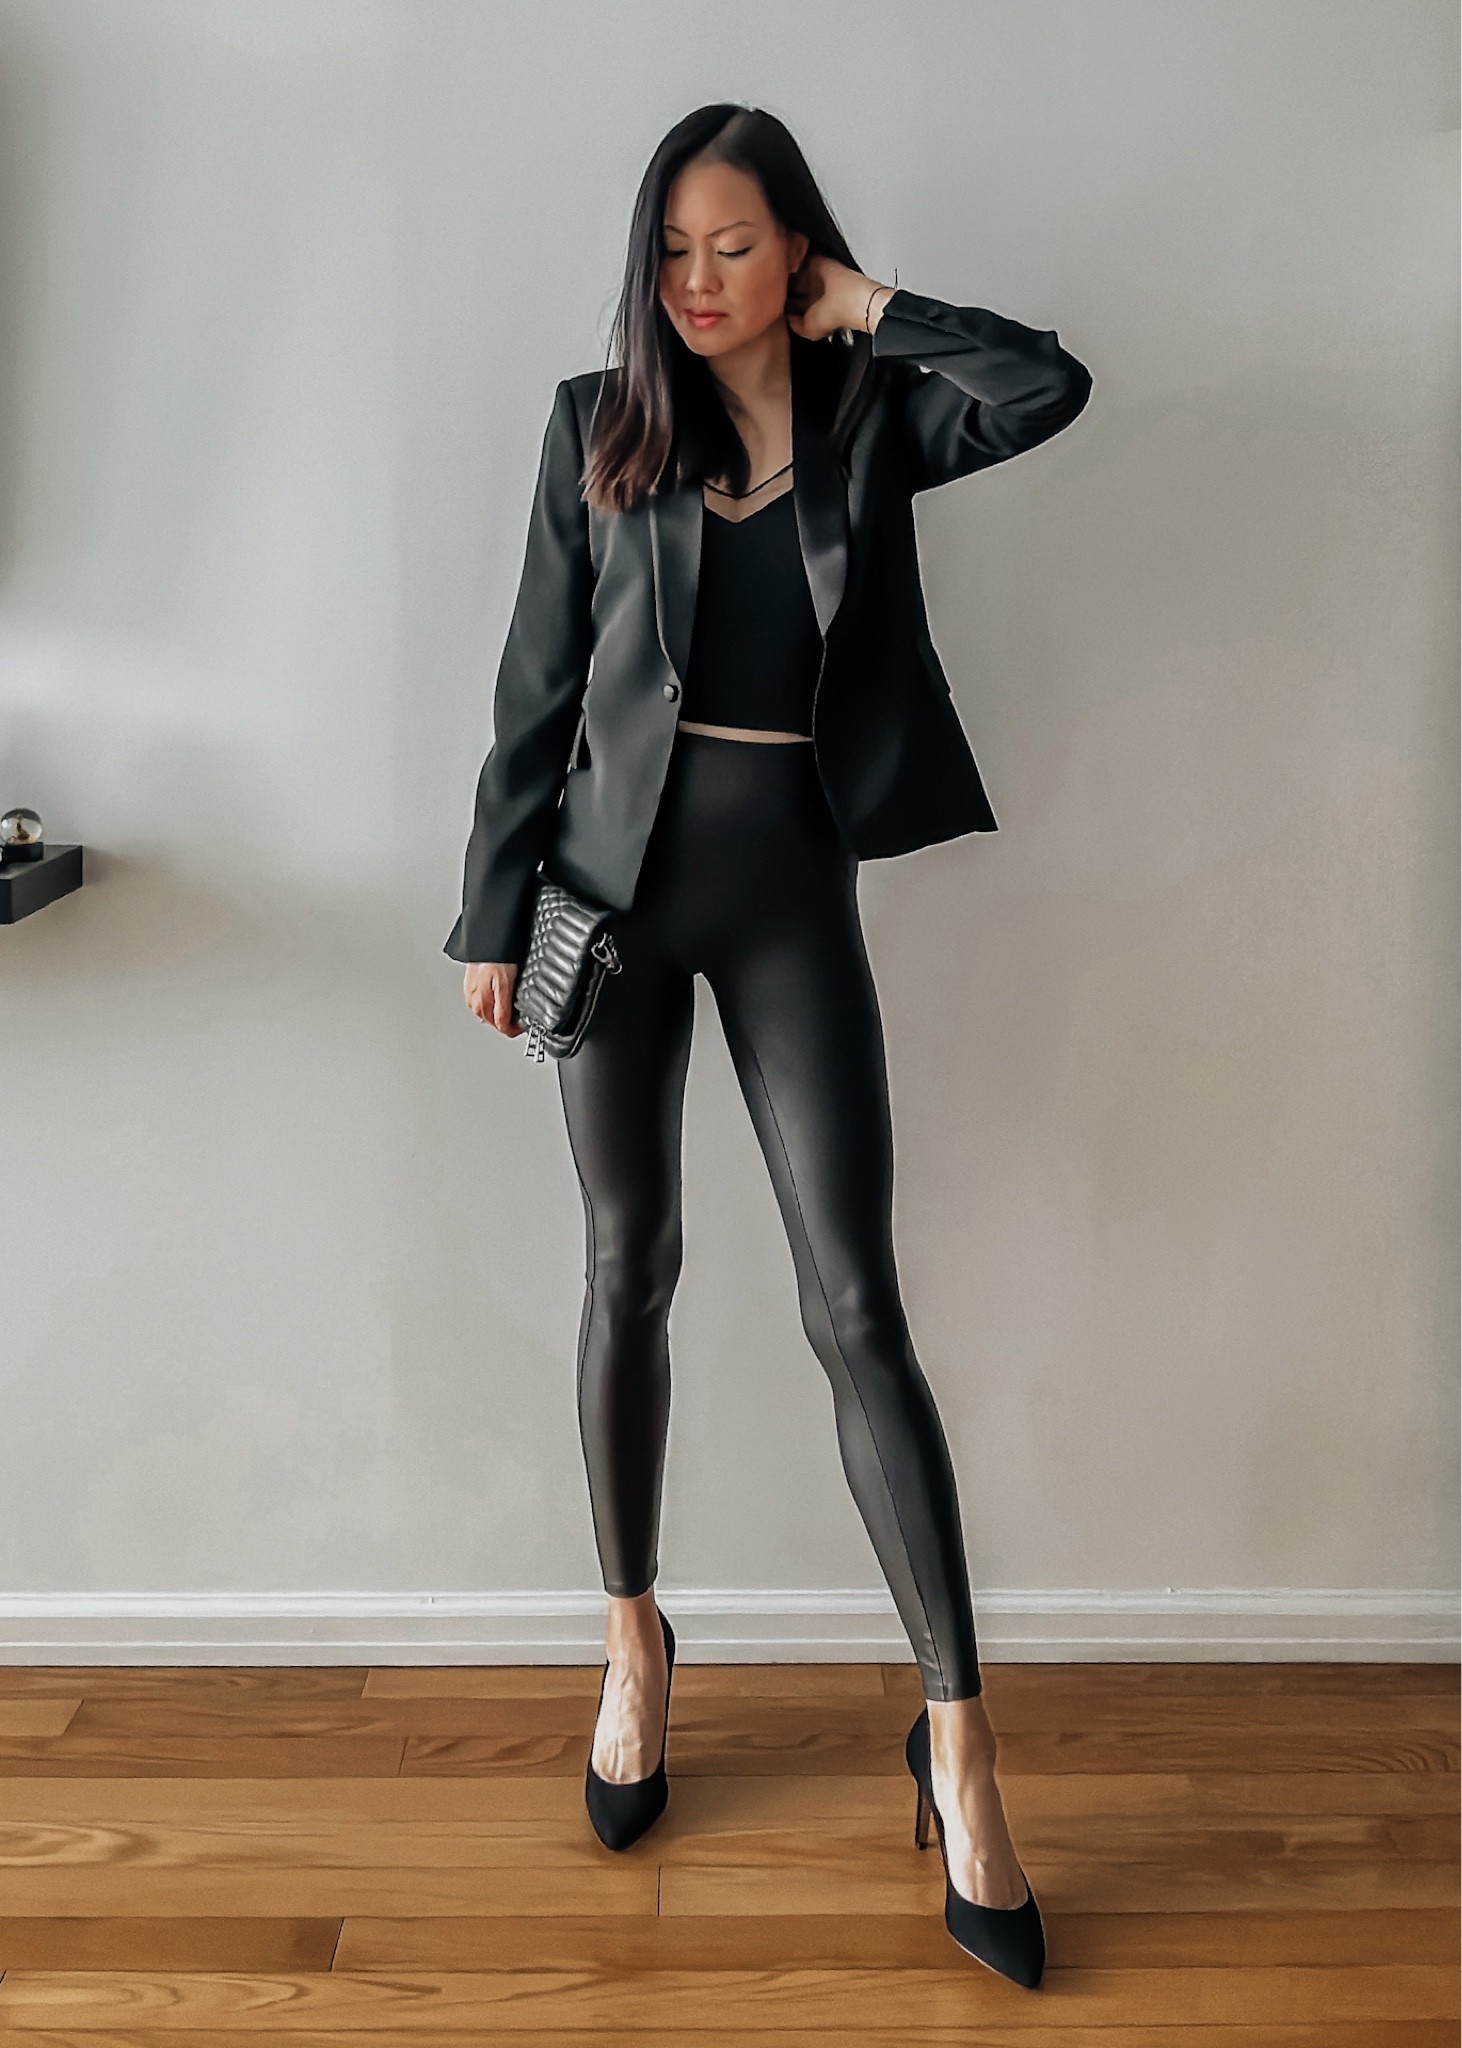 Looking for leather leggings outfit ideas? Wear a chic faux leather leggings…   Faux leather leggings outfit, Leather leggings outfit night, Leather  leggings outfit